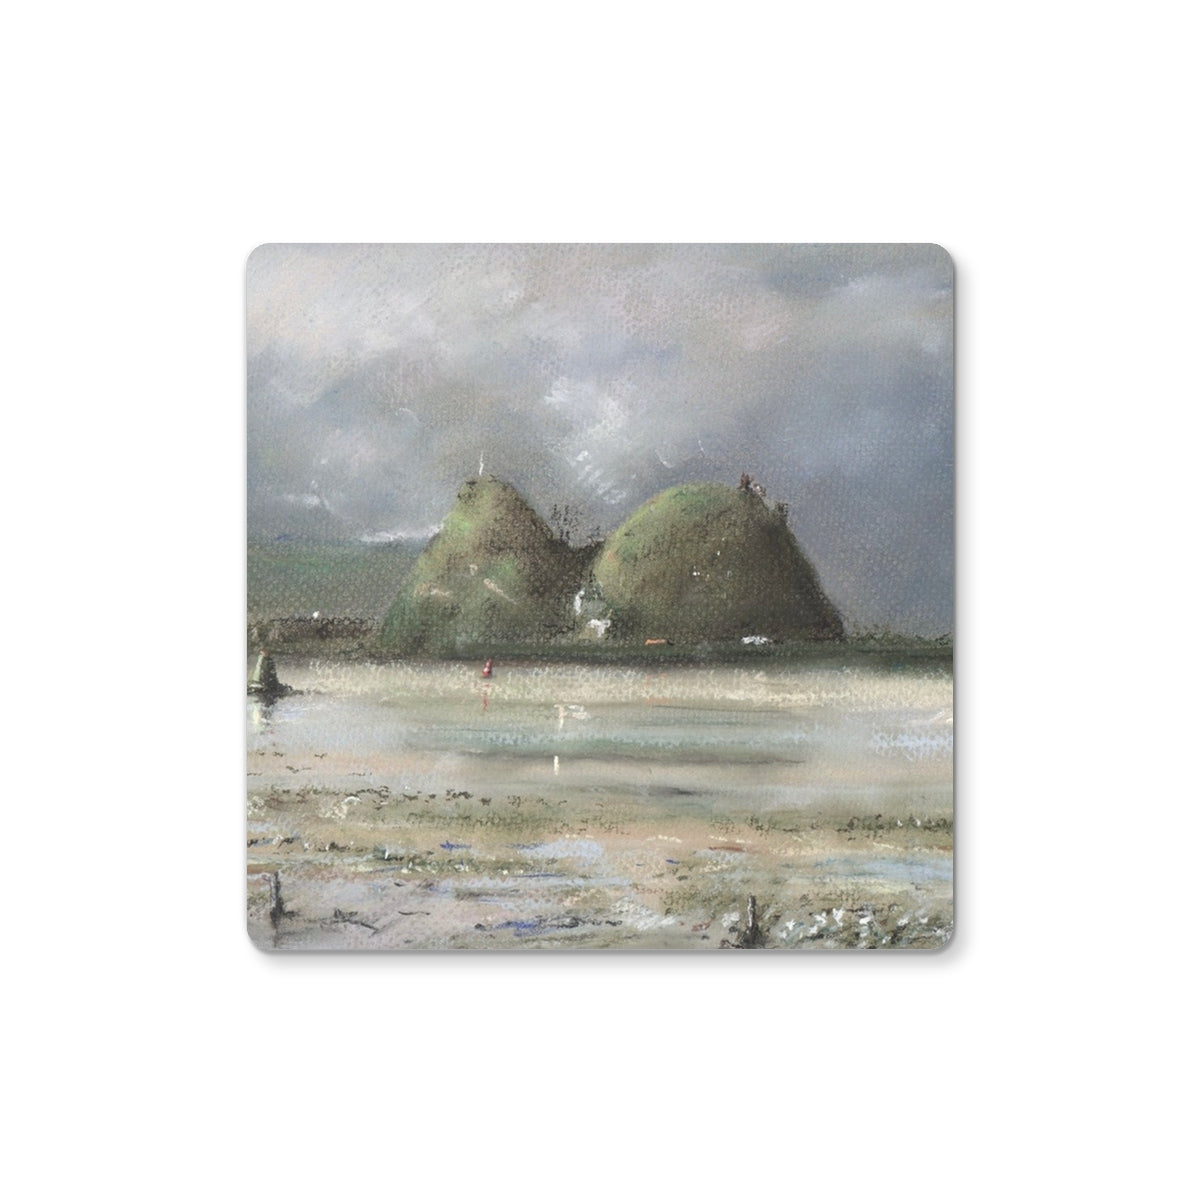 Dumbarton Rock Art Gifts Coaster-Coasters-River Clyde Art Gallery-Single Coaster-Paintings, Prints, Homeware, Art Gifts From Scotland By Scottish Artist Kevin Hunter